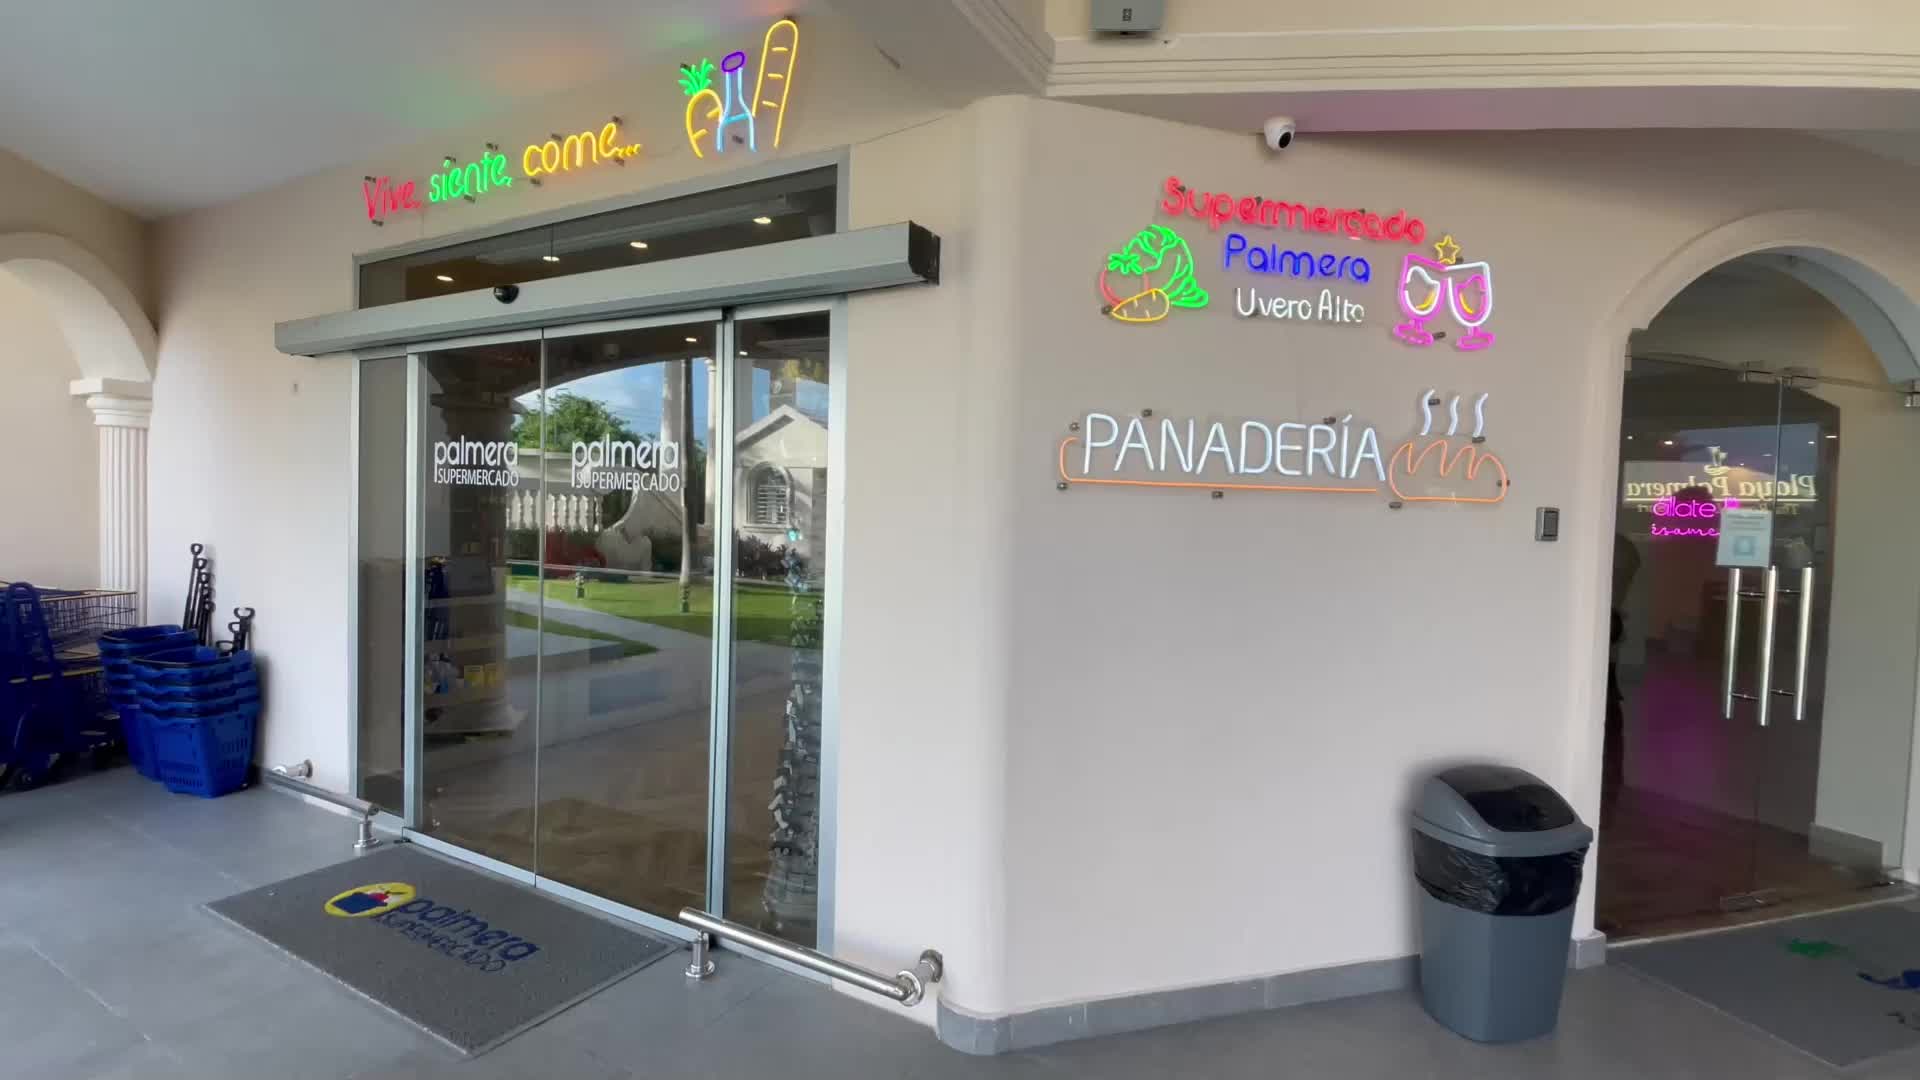 A promotional video showing the Palmera Supermercado at Playa Palmera Beach Resort, guests, staff and products.  